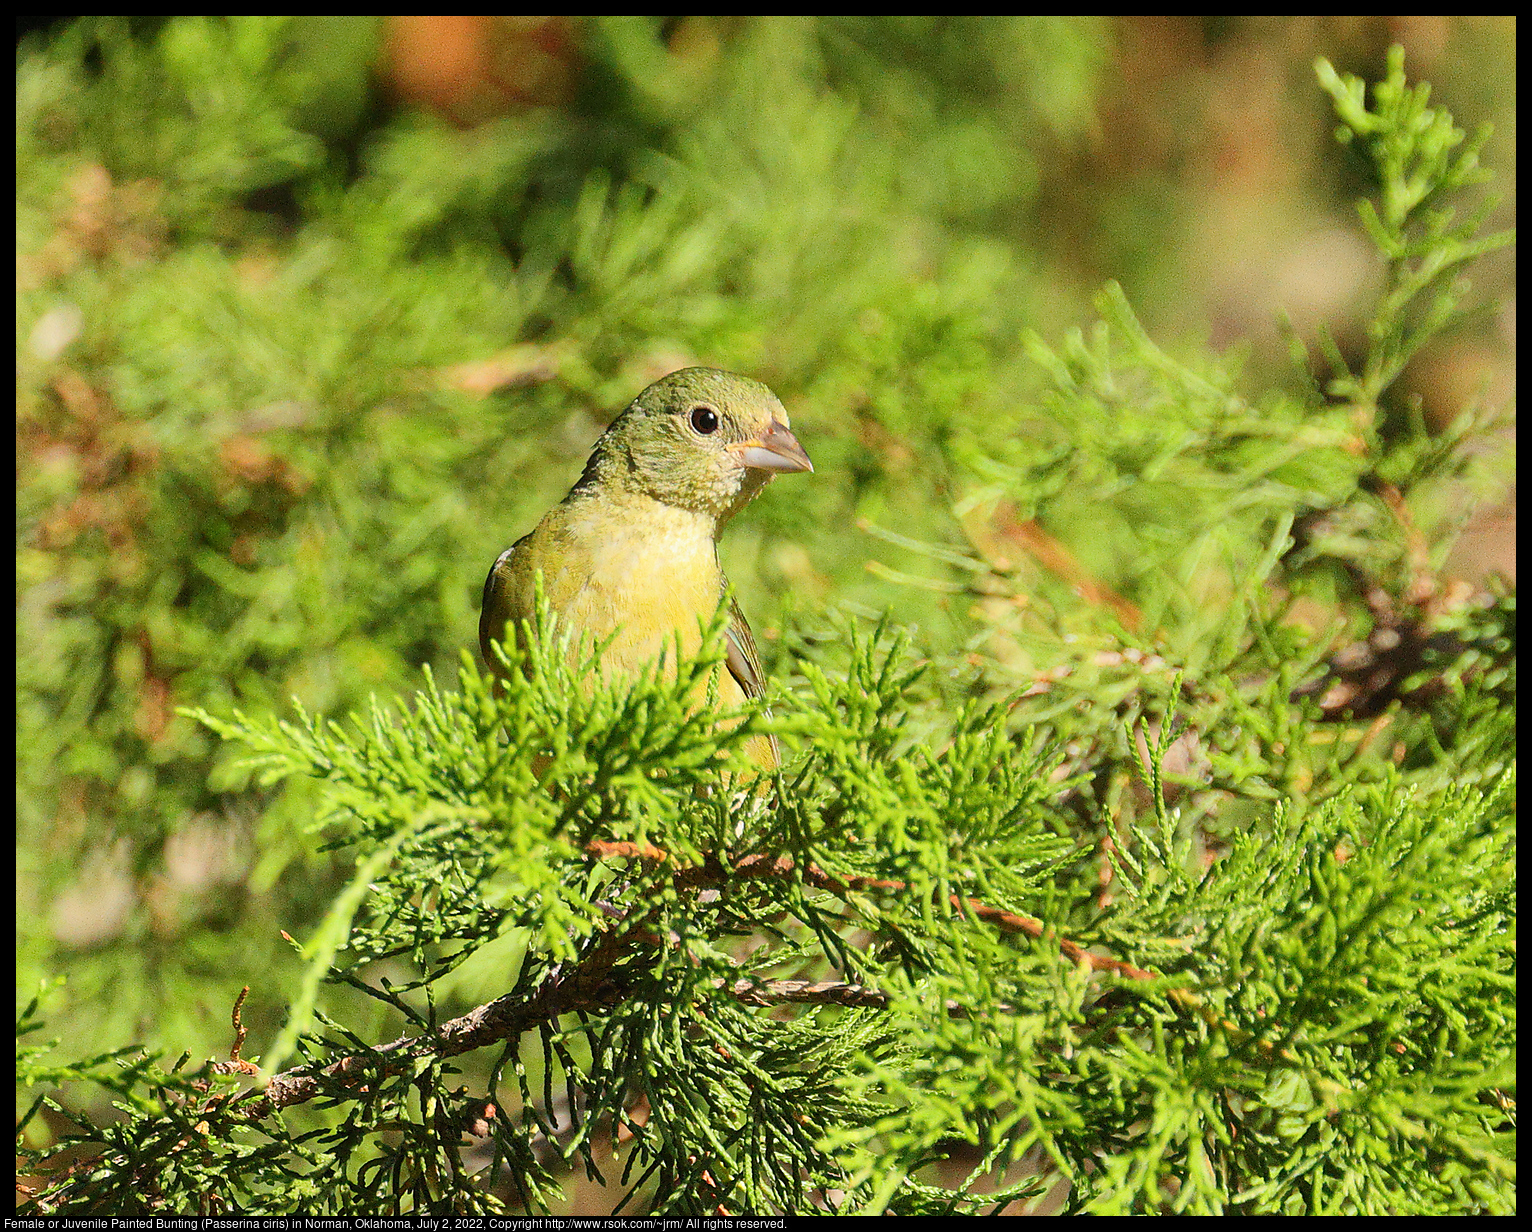 Female or Juvenile Painted Bunting (Passerina ciris) in Norman, Oklahoma, July 2, 2022